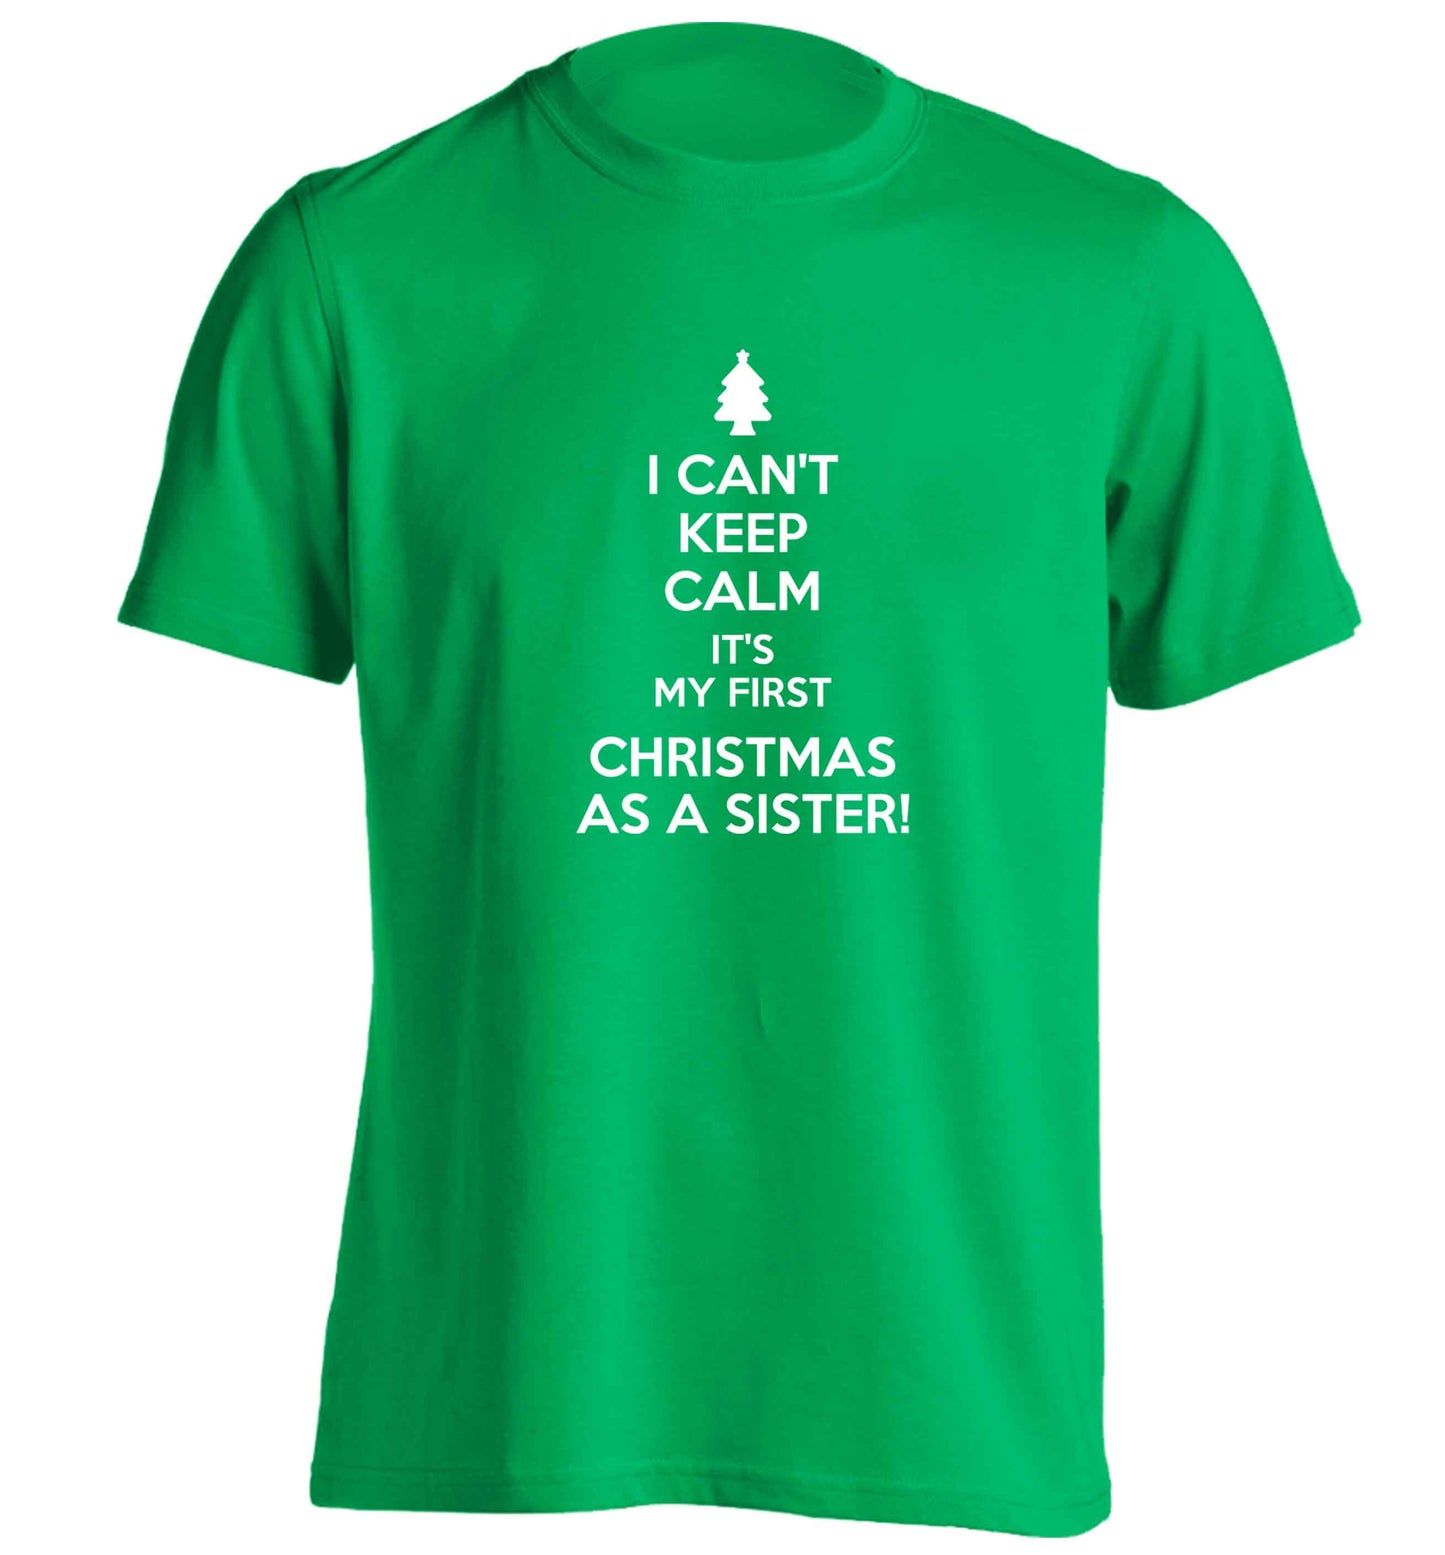 I can't keep calm it's my first Christmas as a sister! adults unisex green Tshirt 2XL